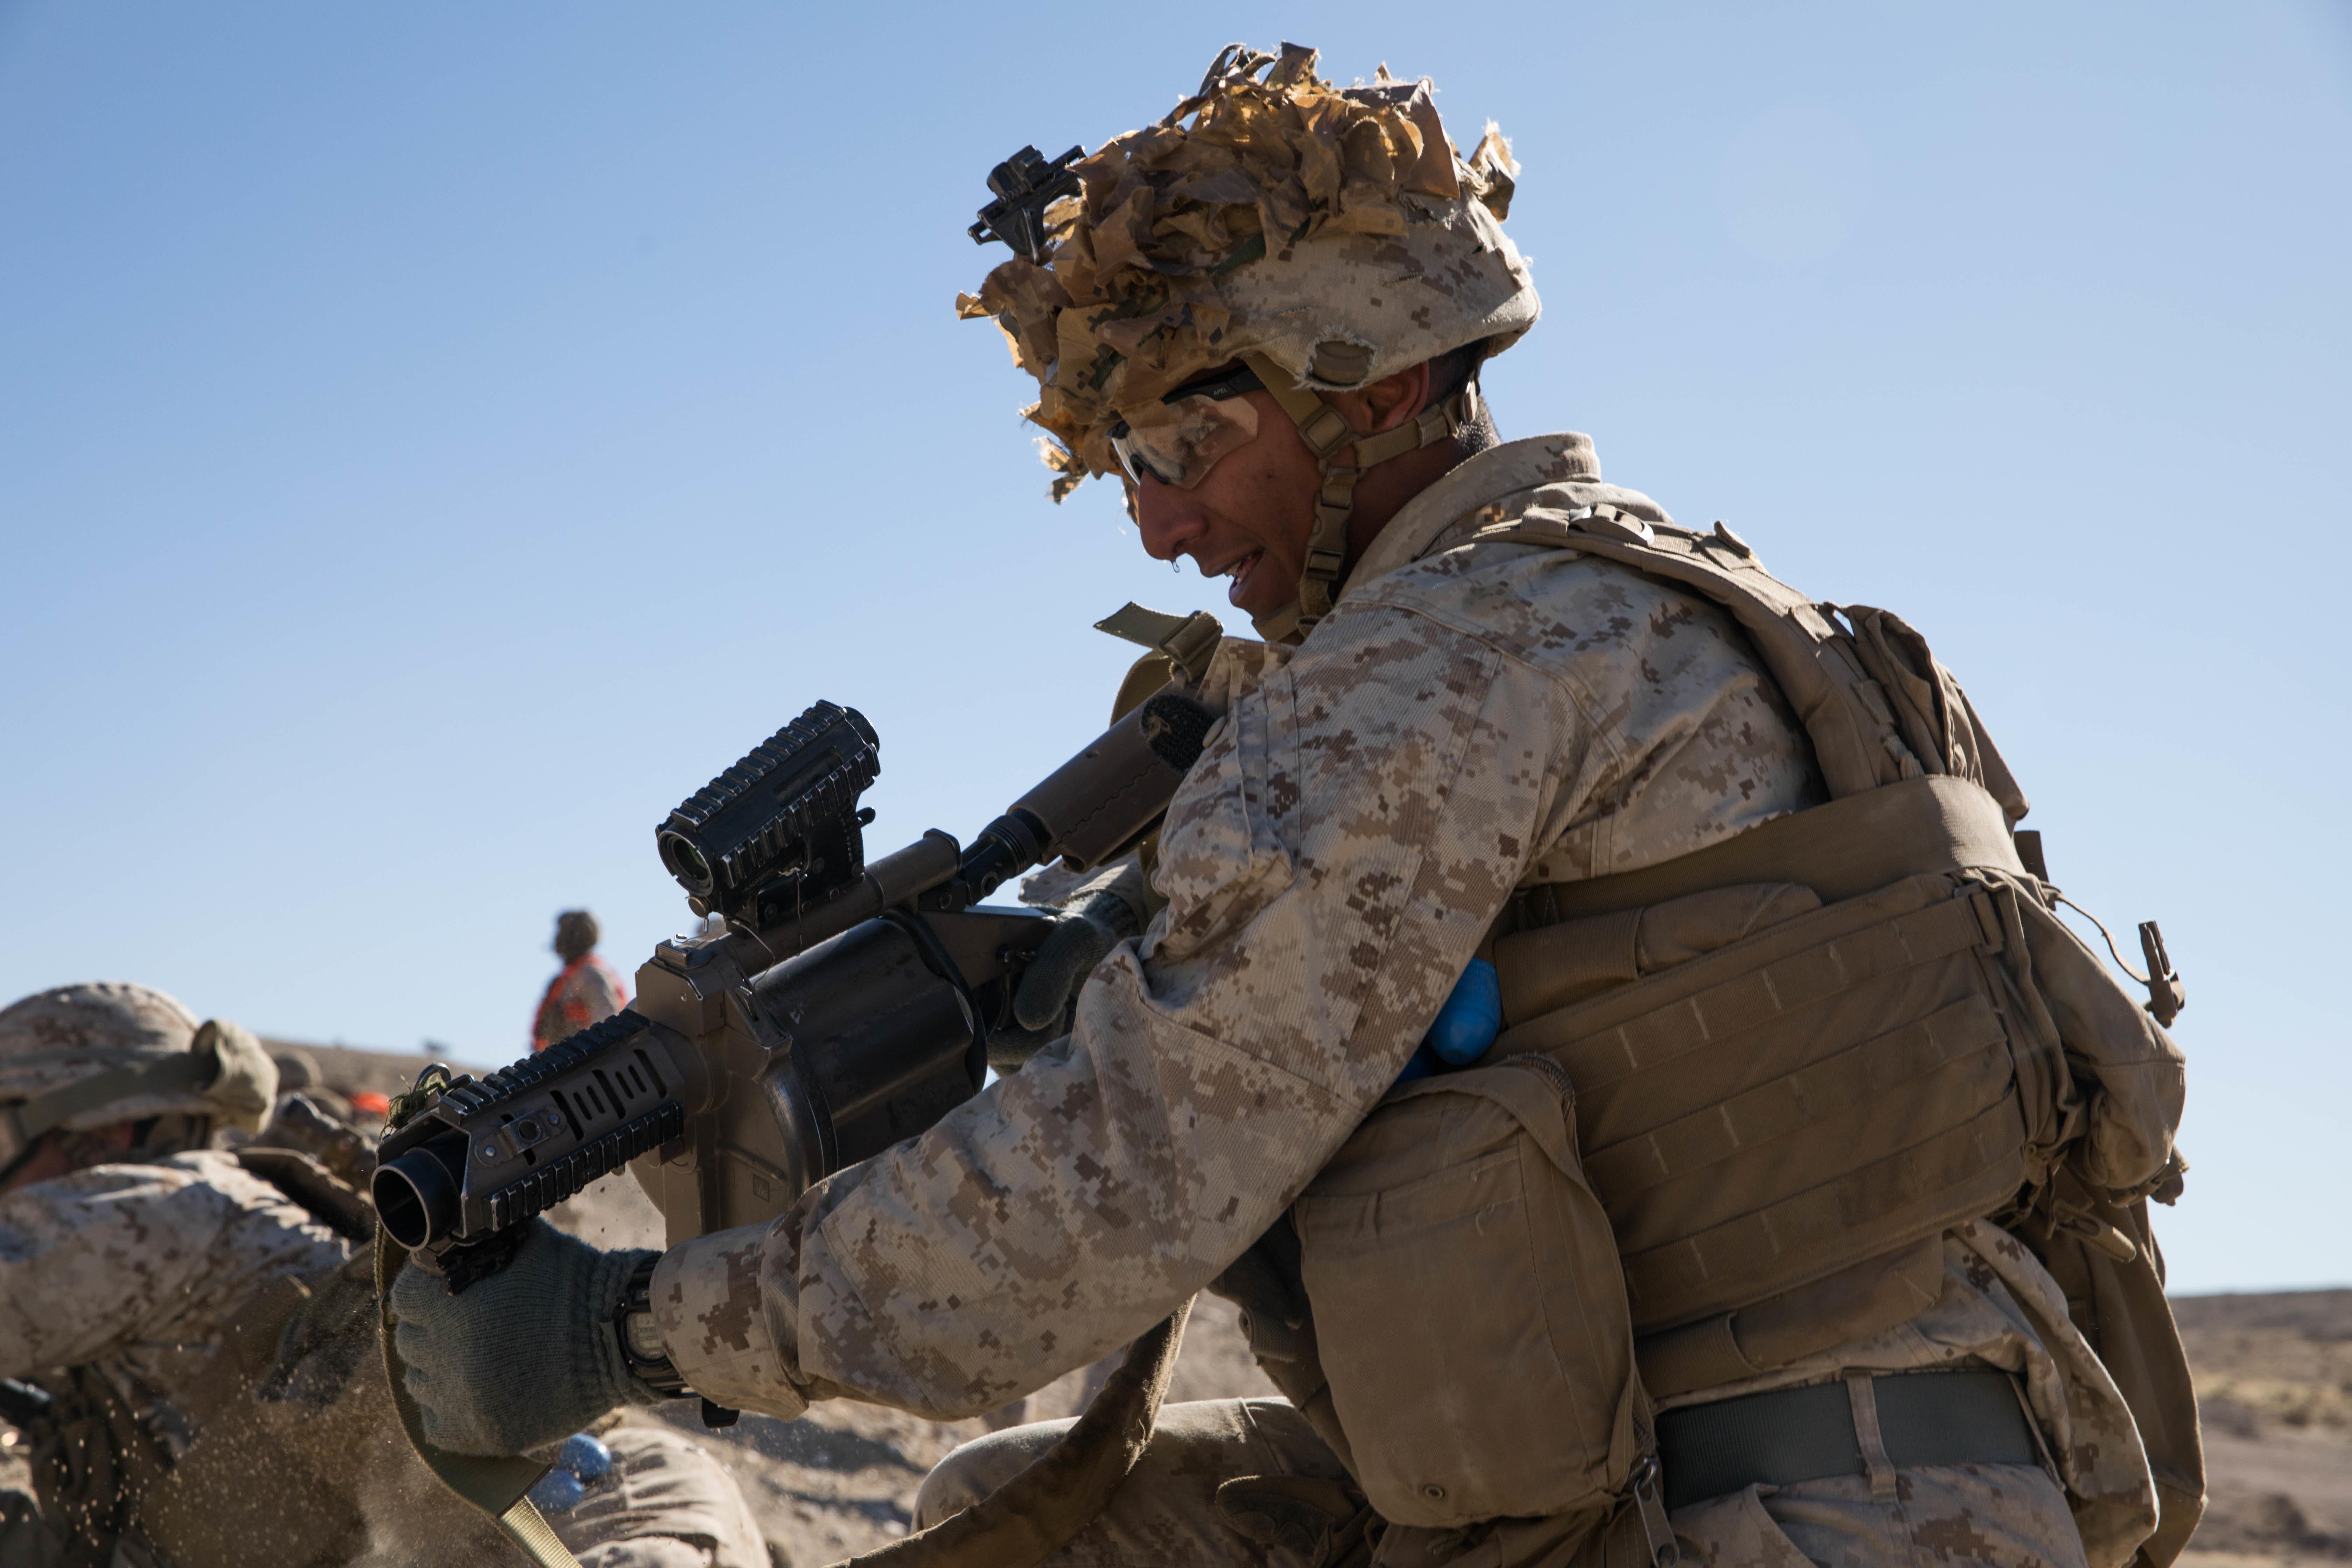 A U.S. Marine Corps Rifleman with 1st Battalion, 3rd Marine Regiment, 3rd Marine Division holds the defense during the Integrated Training Exercise (ITX) at Marine Air Ground Combat Center, Twentynine Palms, California, Jan. 25, 2019. ITX is a month-long training event that applies combined-arms maneuver and offensive and defensive operations to prepare Marines for deployment. (U.S. Marine Corps photo by Cpl. Jack C. Howell)